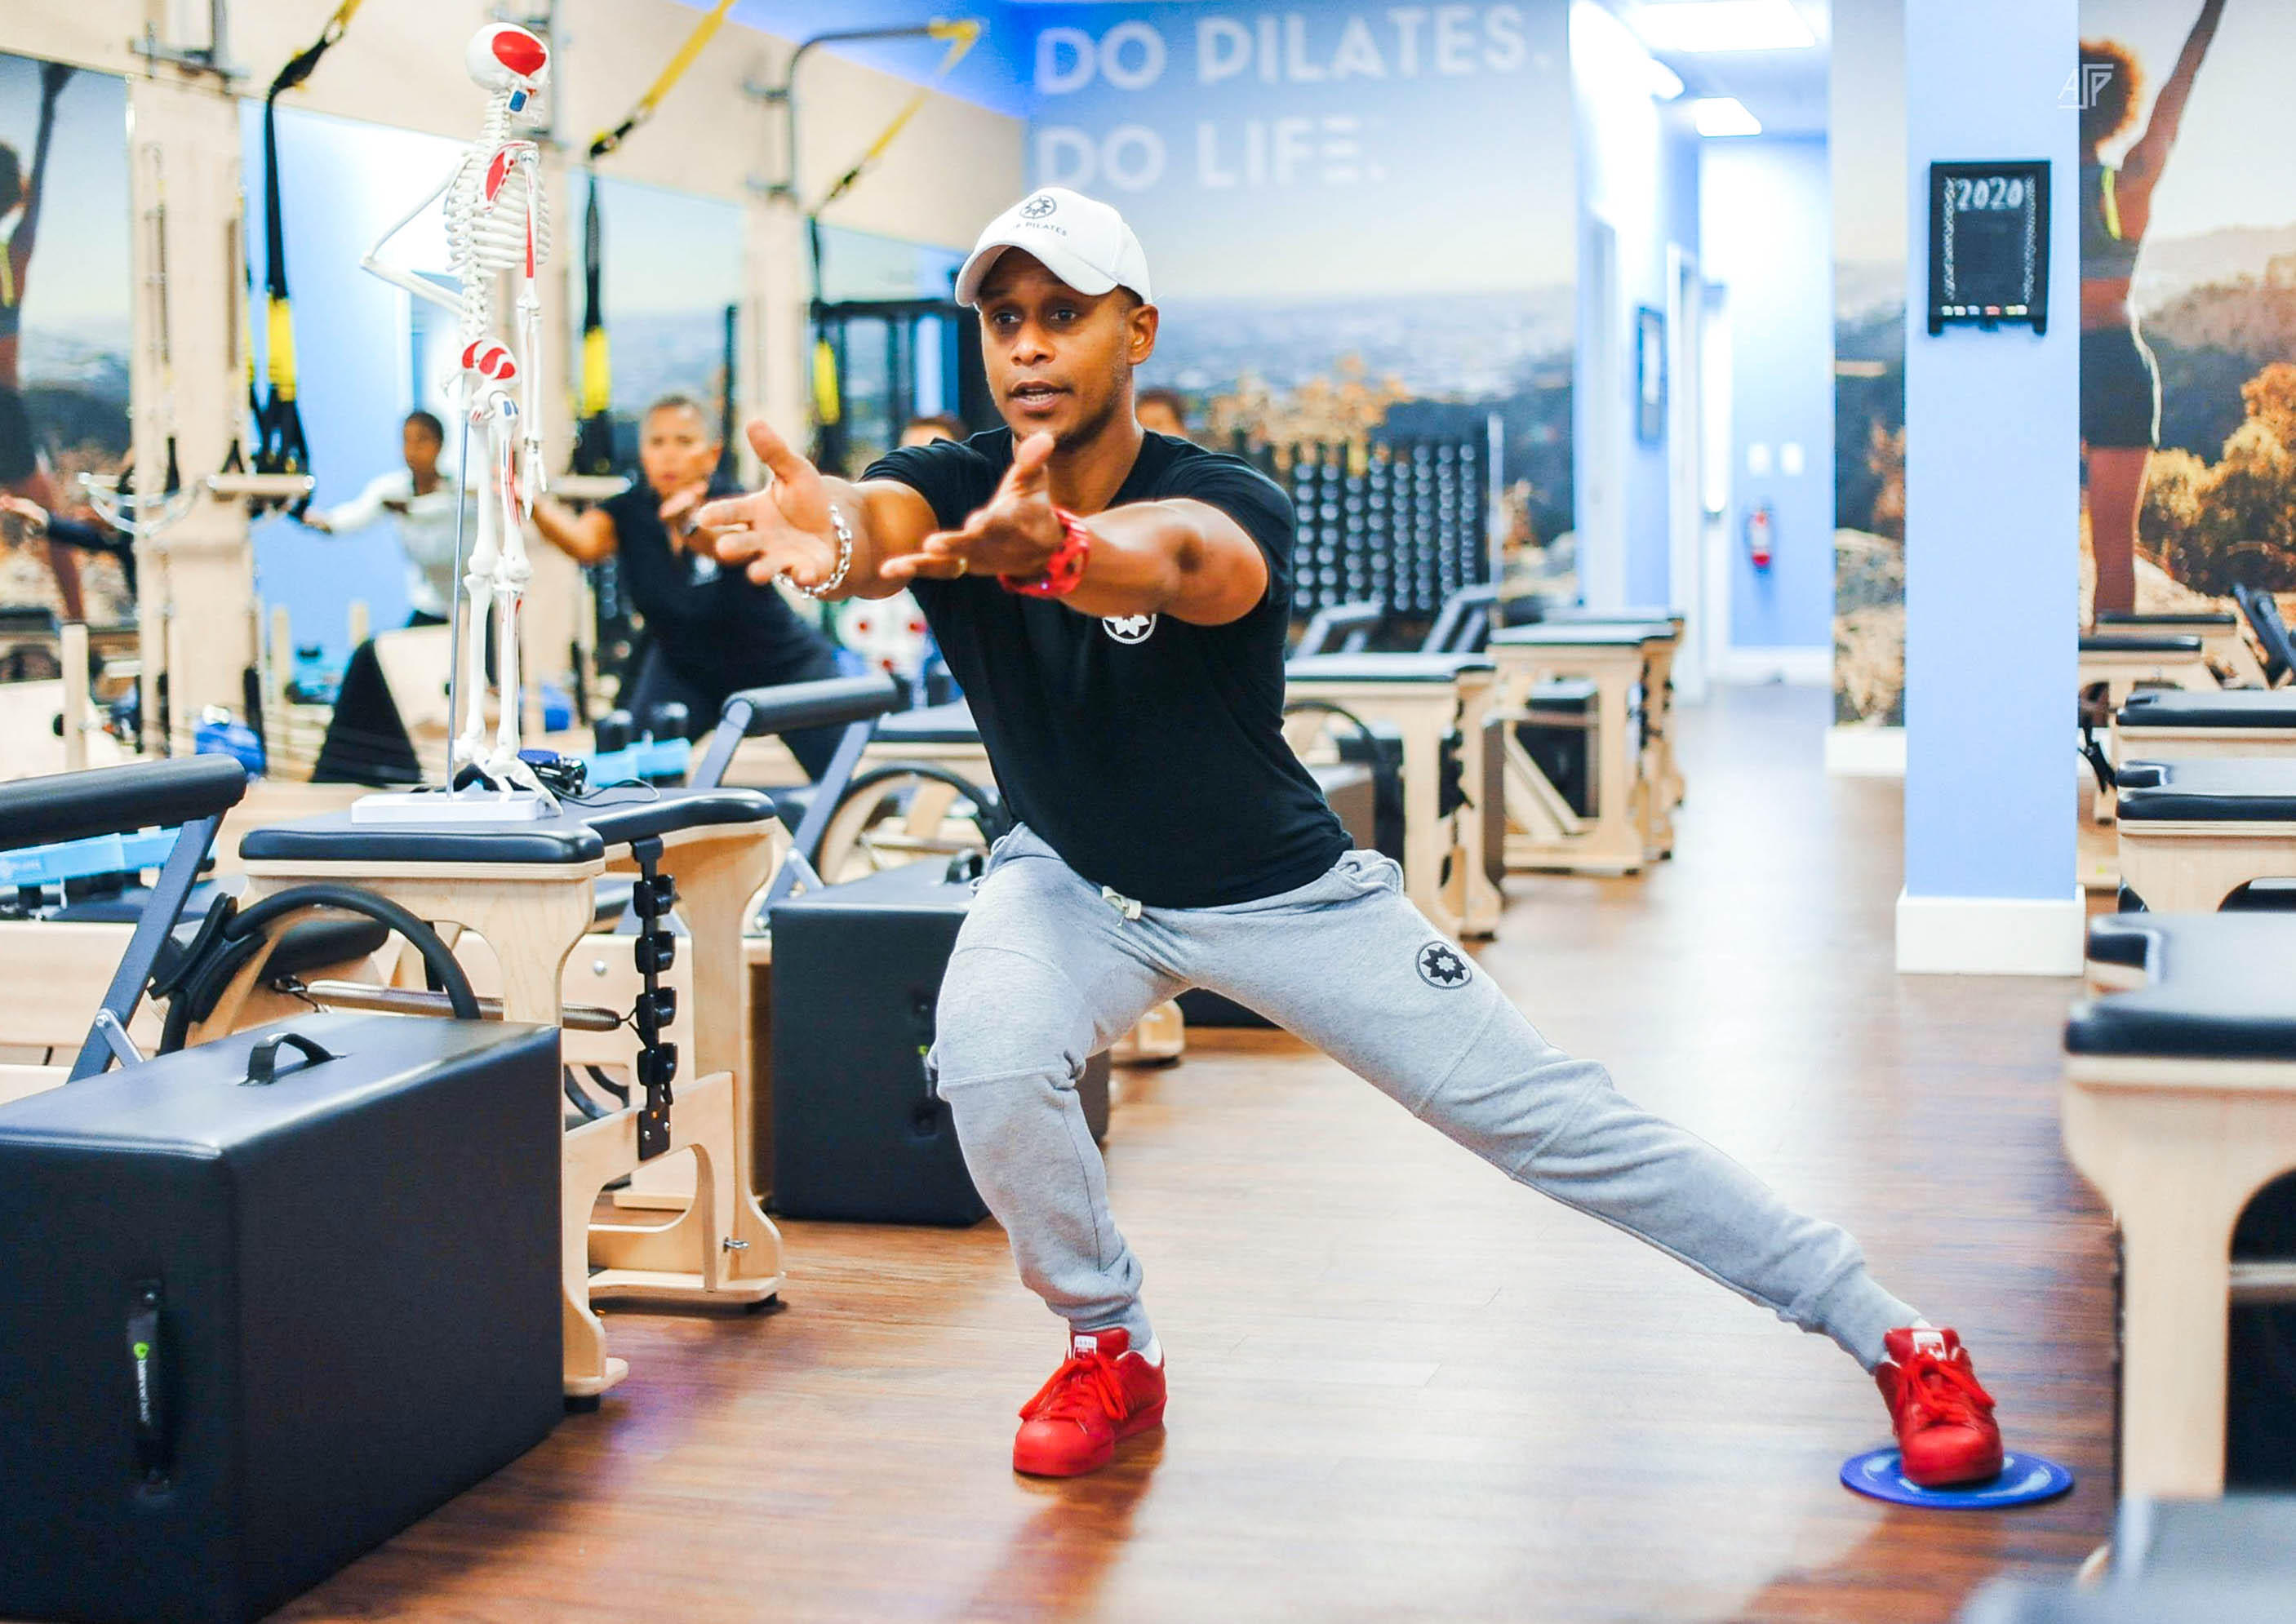 In 2018 Allan was introduced to the world of Pilates as a co-owner and instructor at Club Pilates Laurel. Allan is living his life’s dream by incorporating his 20 plus years as a strength coach, while growing in his knowledge and ability as a Pilates Instructor to train members and operate Club Pilates Laurel alongside his wife (Kim). My wife and I are determined to make each of our Club Pilates studios like a family where through sound training guidance, warmth and encouragement we journey with our CP Family Members to live healthy lifestyles. We hope to make Club Pilates a cornerstone for health and wellness in the community of Prince George’s County Maryland for many years to come.

Allan’s journey into the health and wellness industry began as a strength coach started in 1998. He became certified and began coaching at small studios in Delaware and Maryland. Allan quickly recognized the need to learn new training methods and approaches to better suit the needs of his clients.  

Allan believes exercise should be a regular part of everyone’s lifestyle habits which is why he really enjoys relating to and having fun with his clients as he sees them improving in their movement quality, strength and endurance. He is adept at designing and implementing programs for a wide spectrum of populations. 

Allan has a BA degree in Criminal Justice from Hampton University. He holds the following certifications: Certified Strength and Conditioning Specialist; FMS/certified, having learned how to identify and improve movement imbalances through corrective exercises; Level-2 StrongFirst Kettlebell Instructor. This certification is one of the more grueling certifications in the fitness industry requiring 3 straight days of intense training designed to test your physical proficiency, stamina and strength. Out of a class of over 60 individuals Allan was one of the one third that was able to achieve this status.